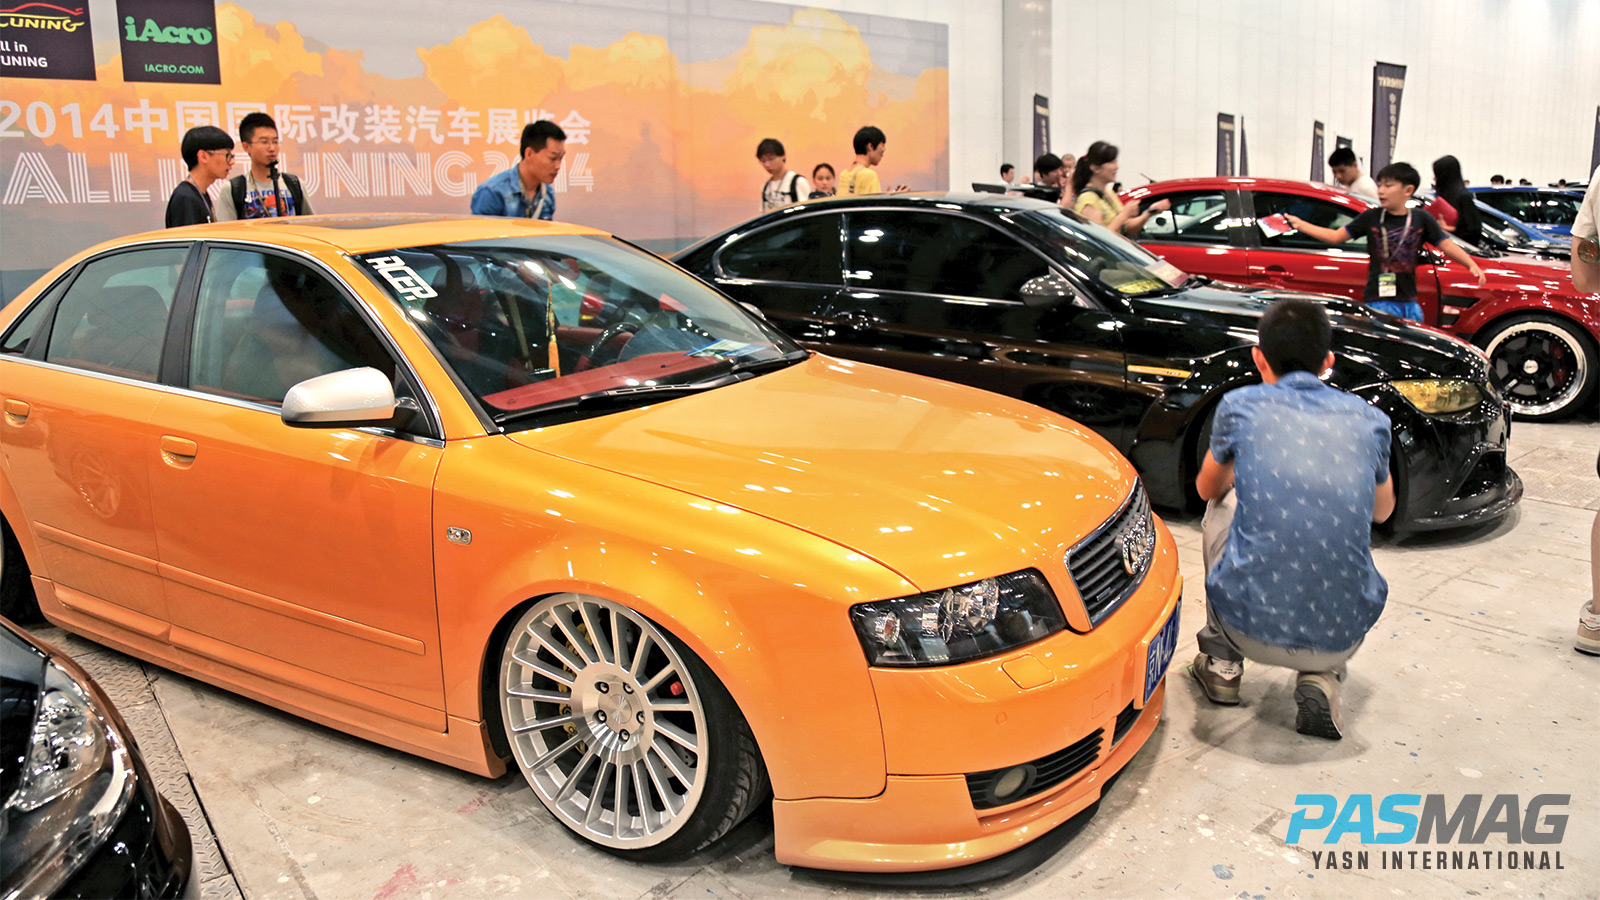 A Promising Prospect: China's All in Tuning show